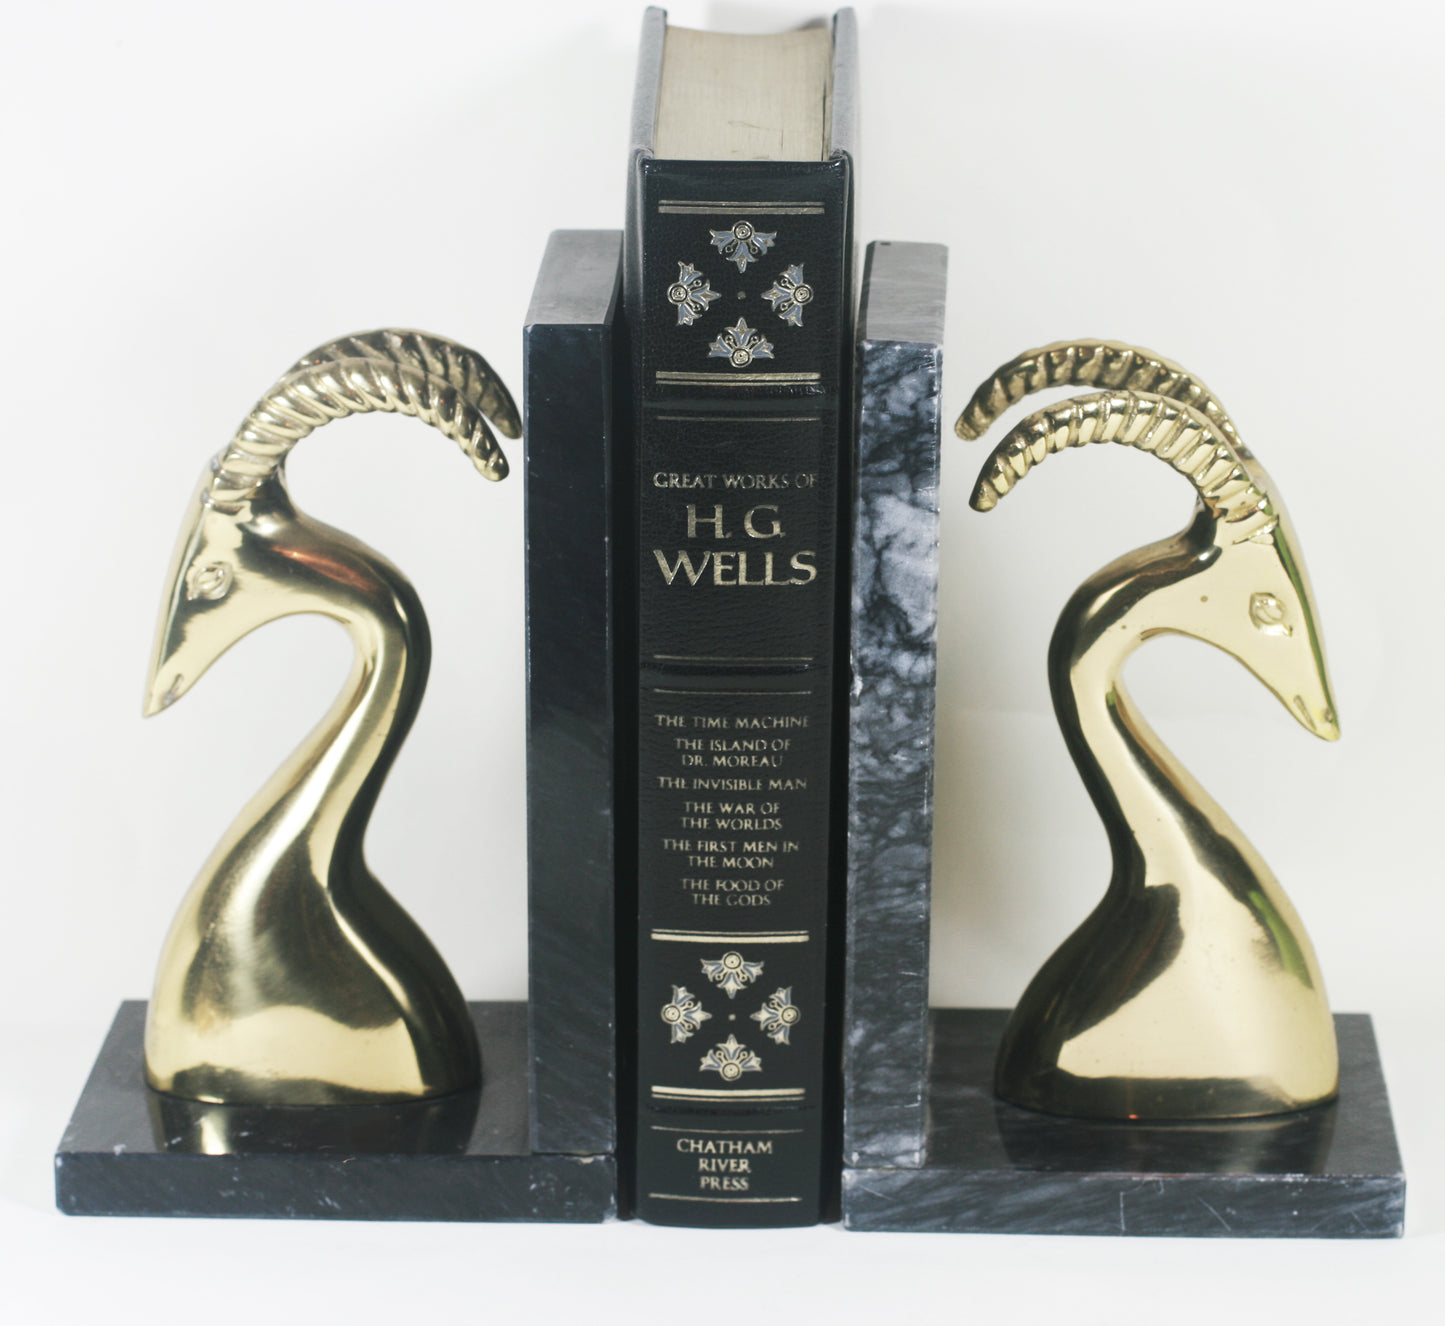 Mid-century Brass and Marble Gazelle Bookends